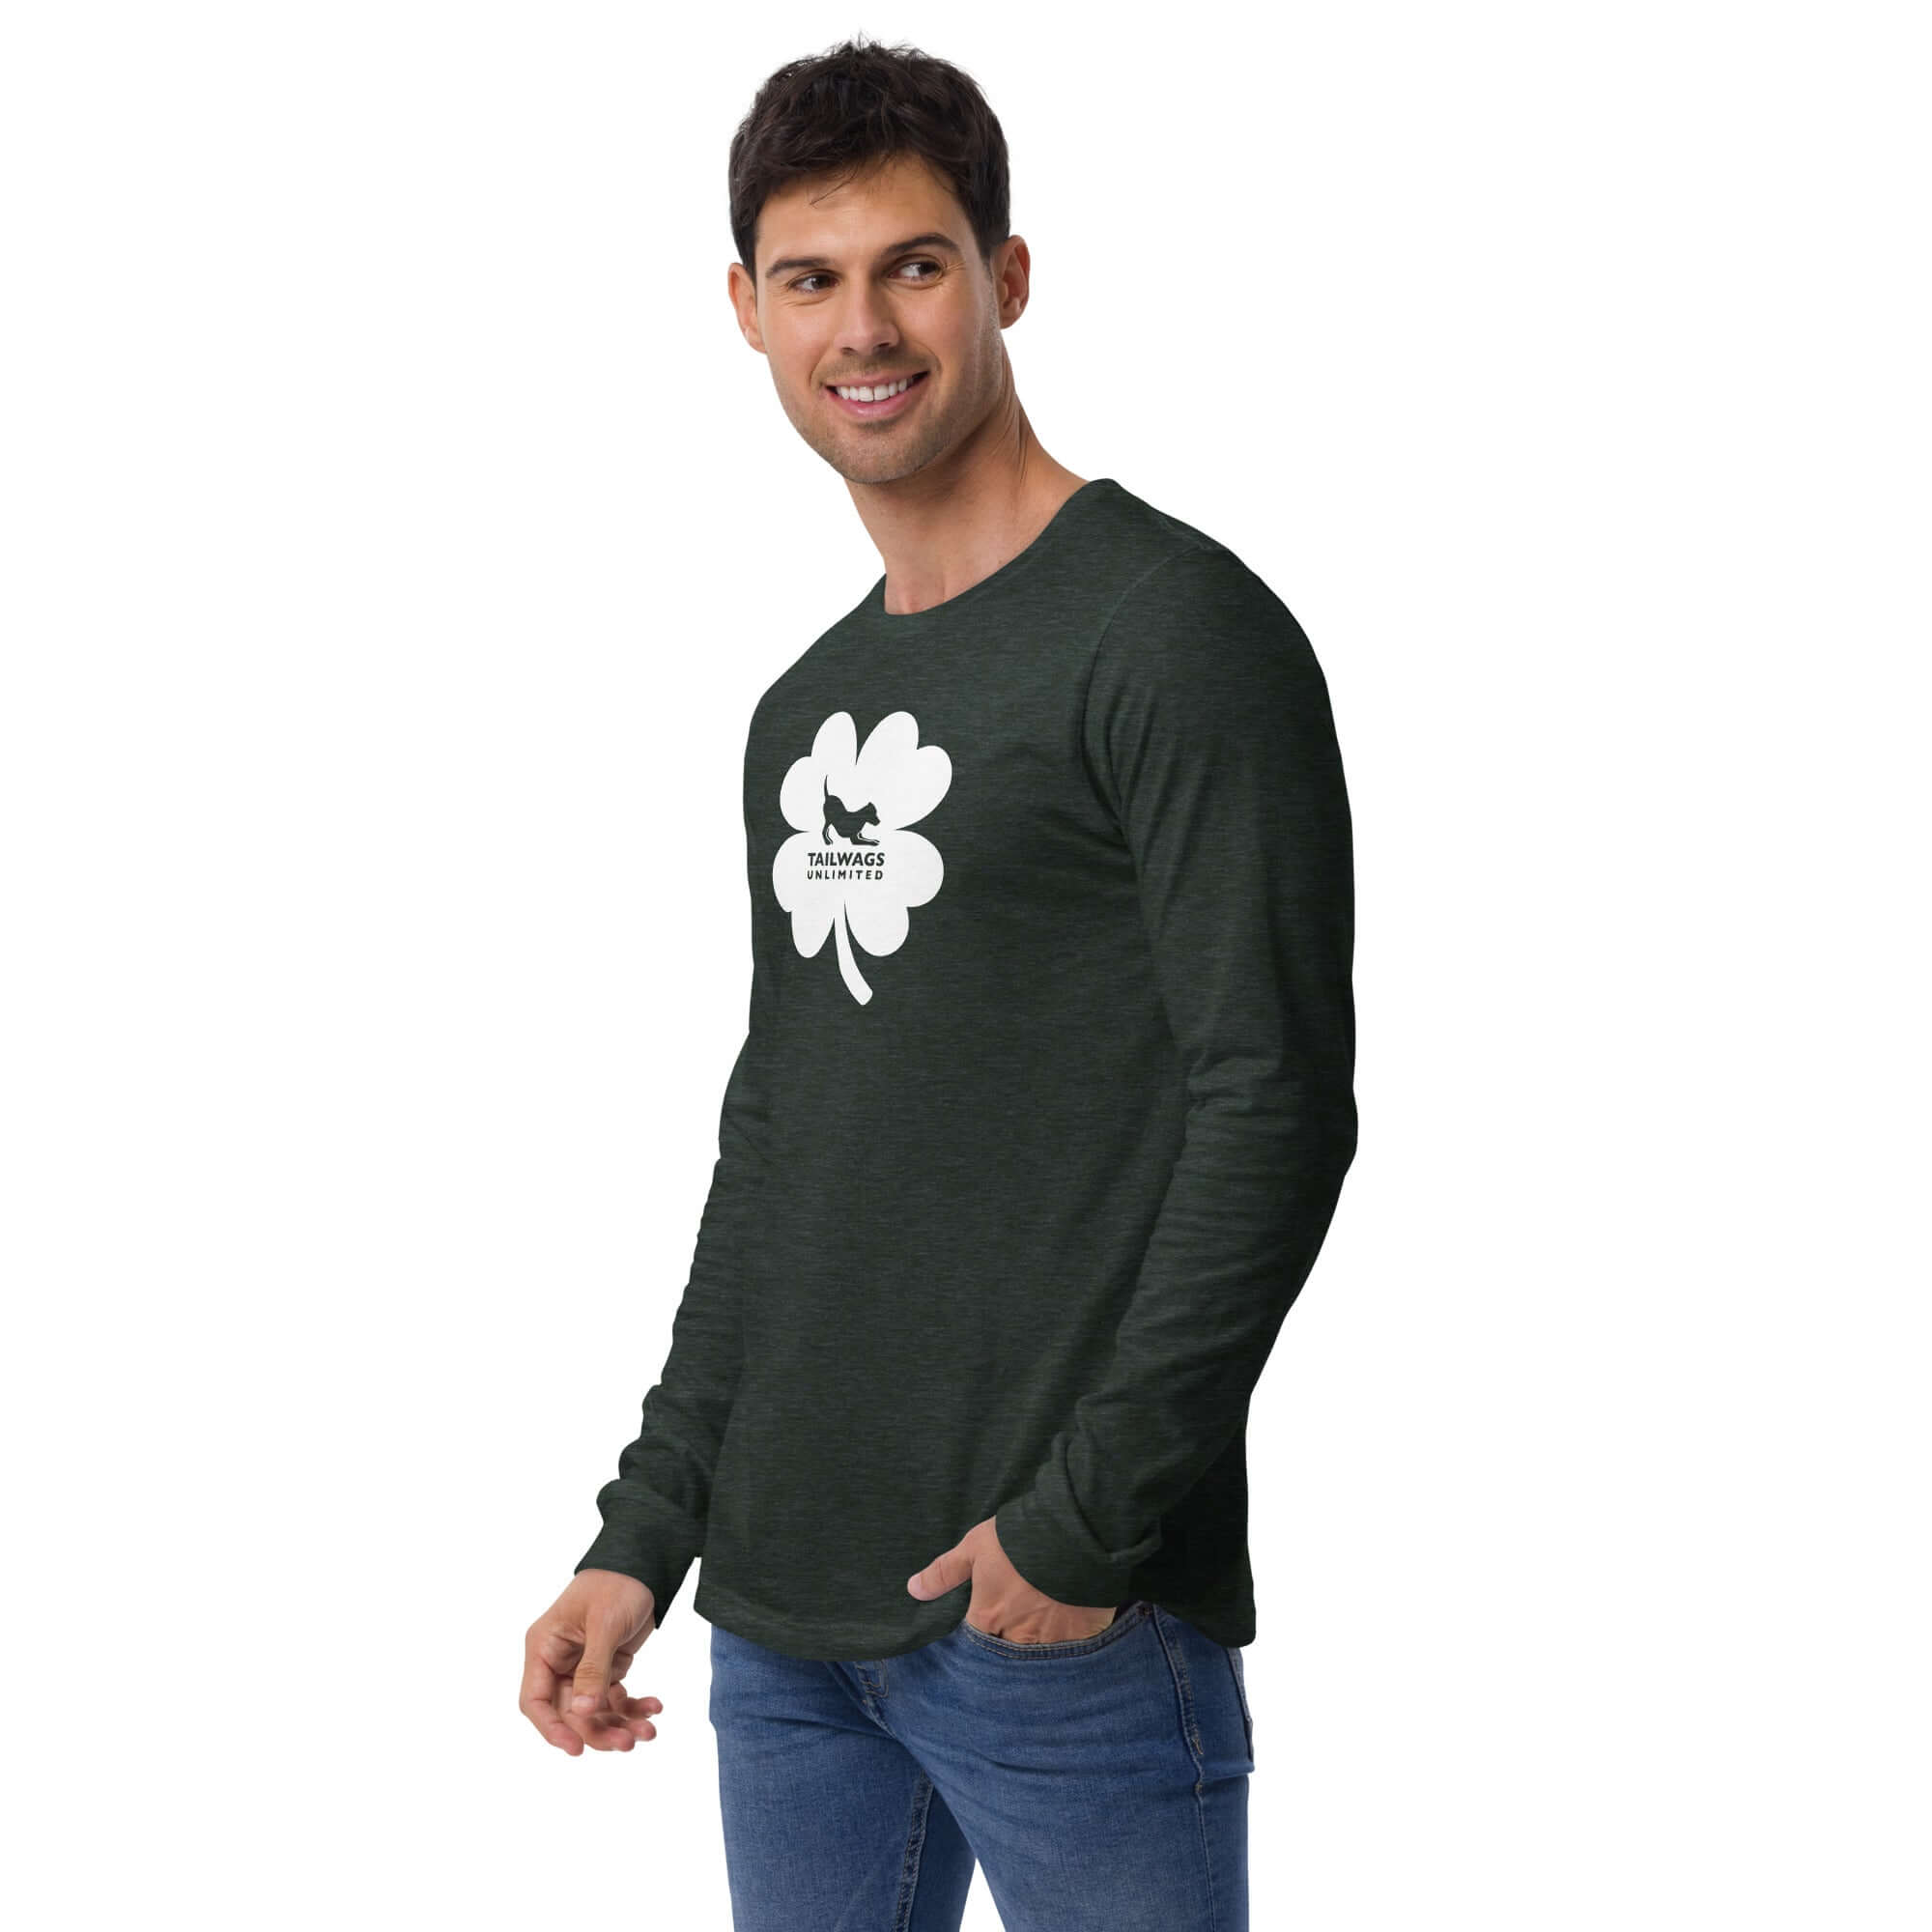 White Four Leaf Clover Logo Long Sleeve Tee - TAILWAGS UNLIMITED